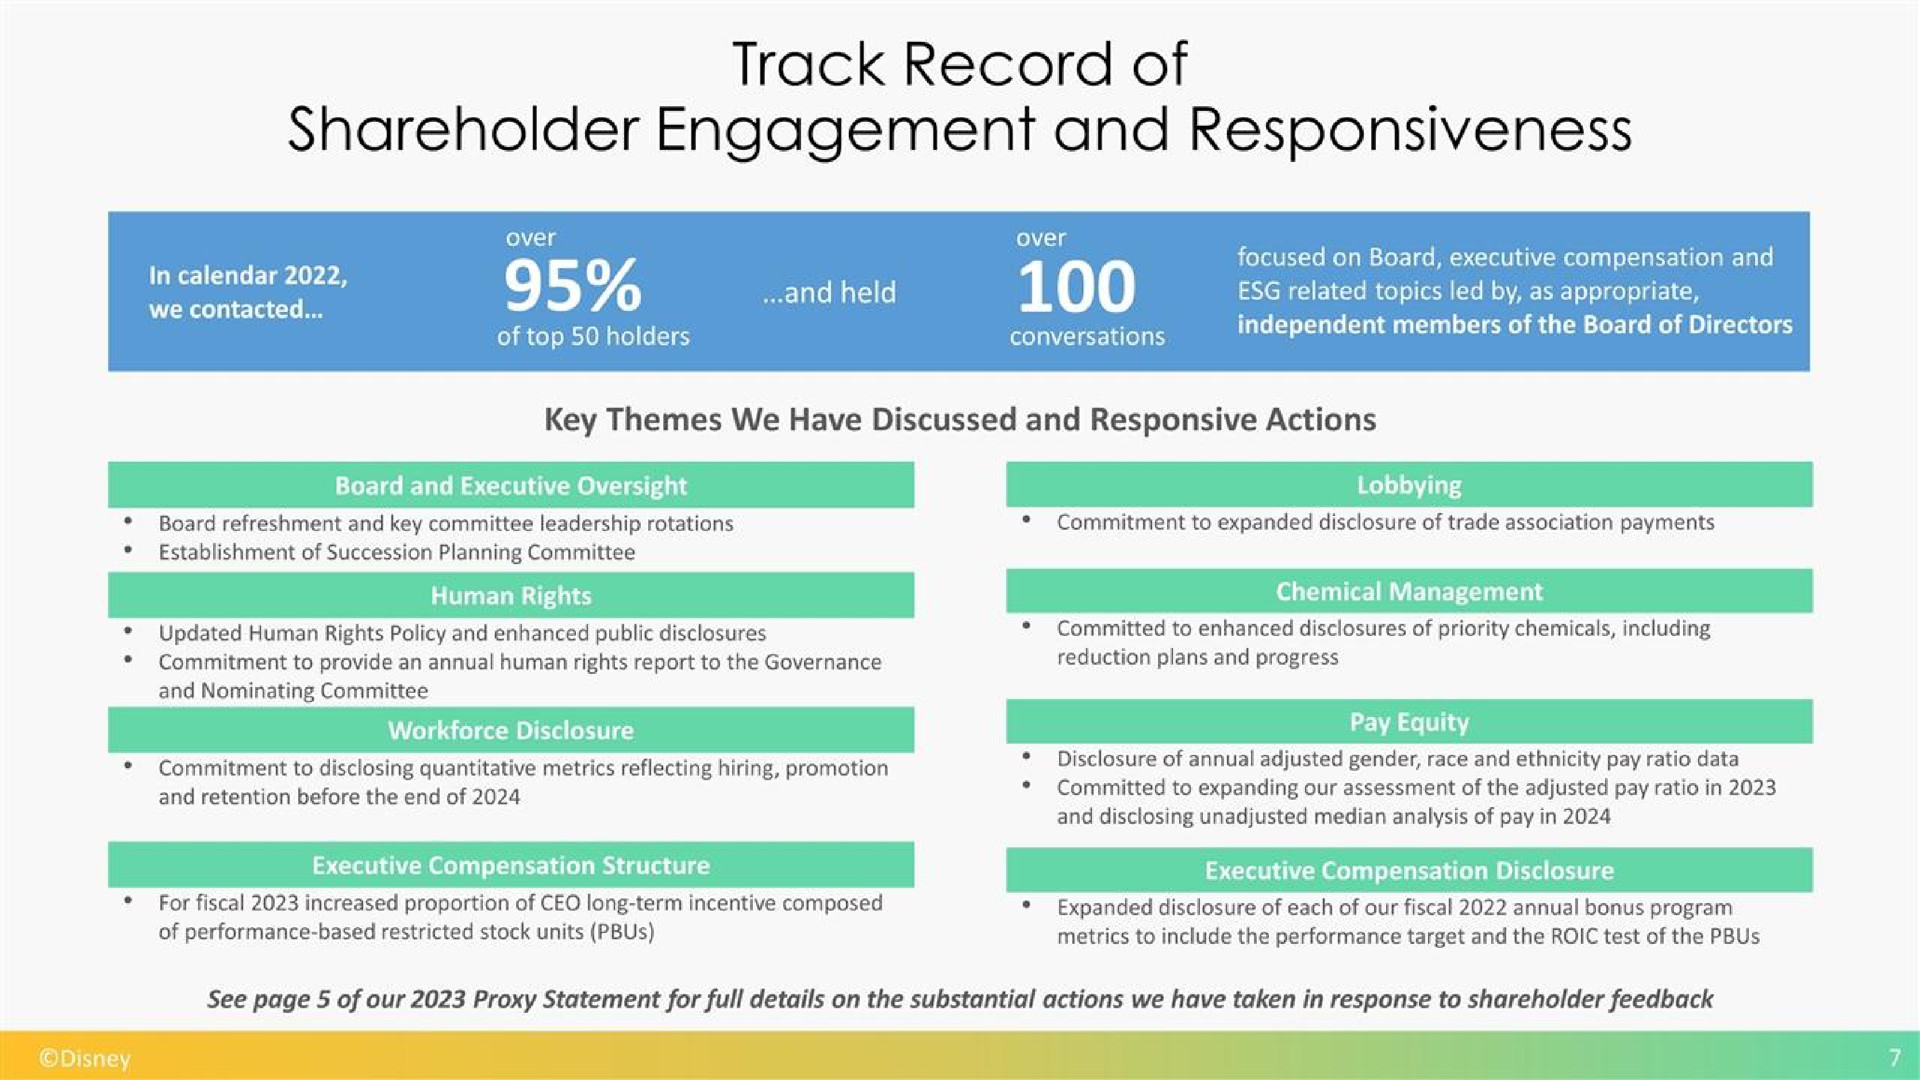 track record of shareholder engagement and responsiveness | Disney